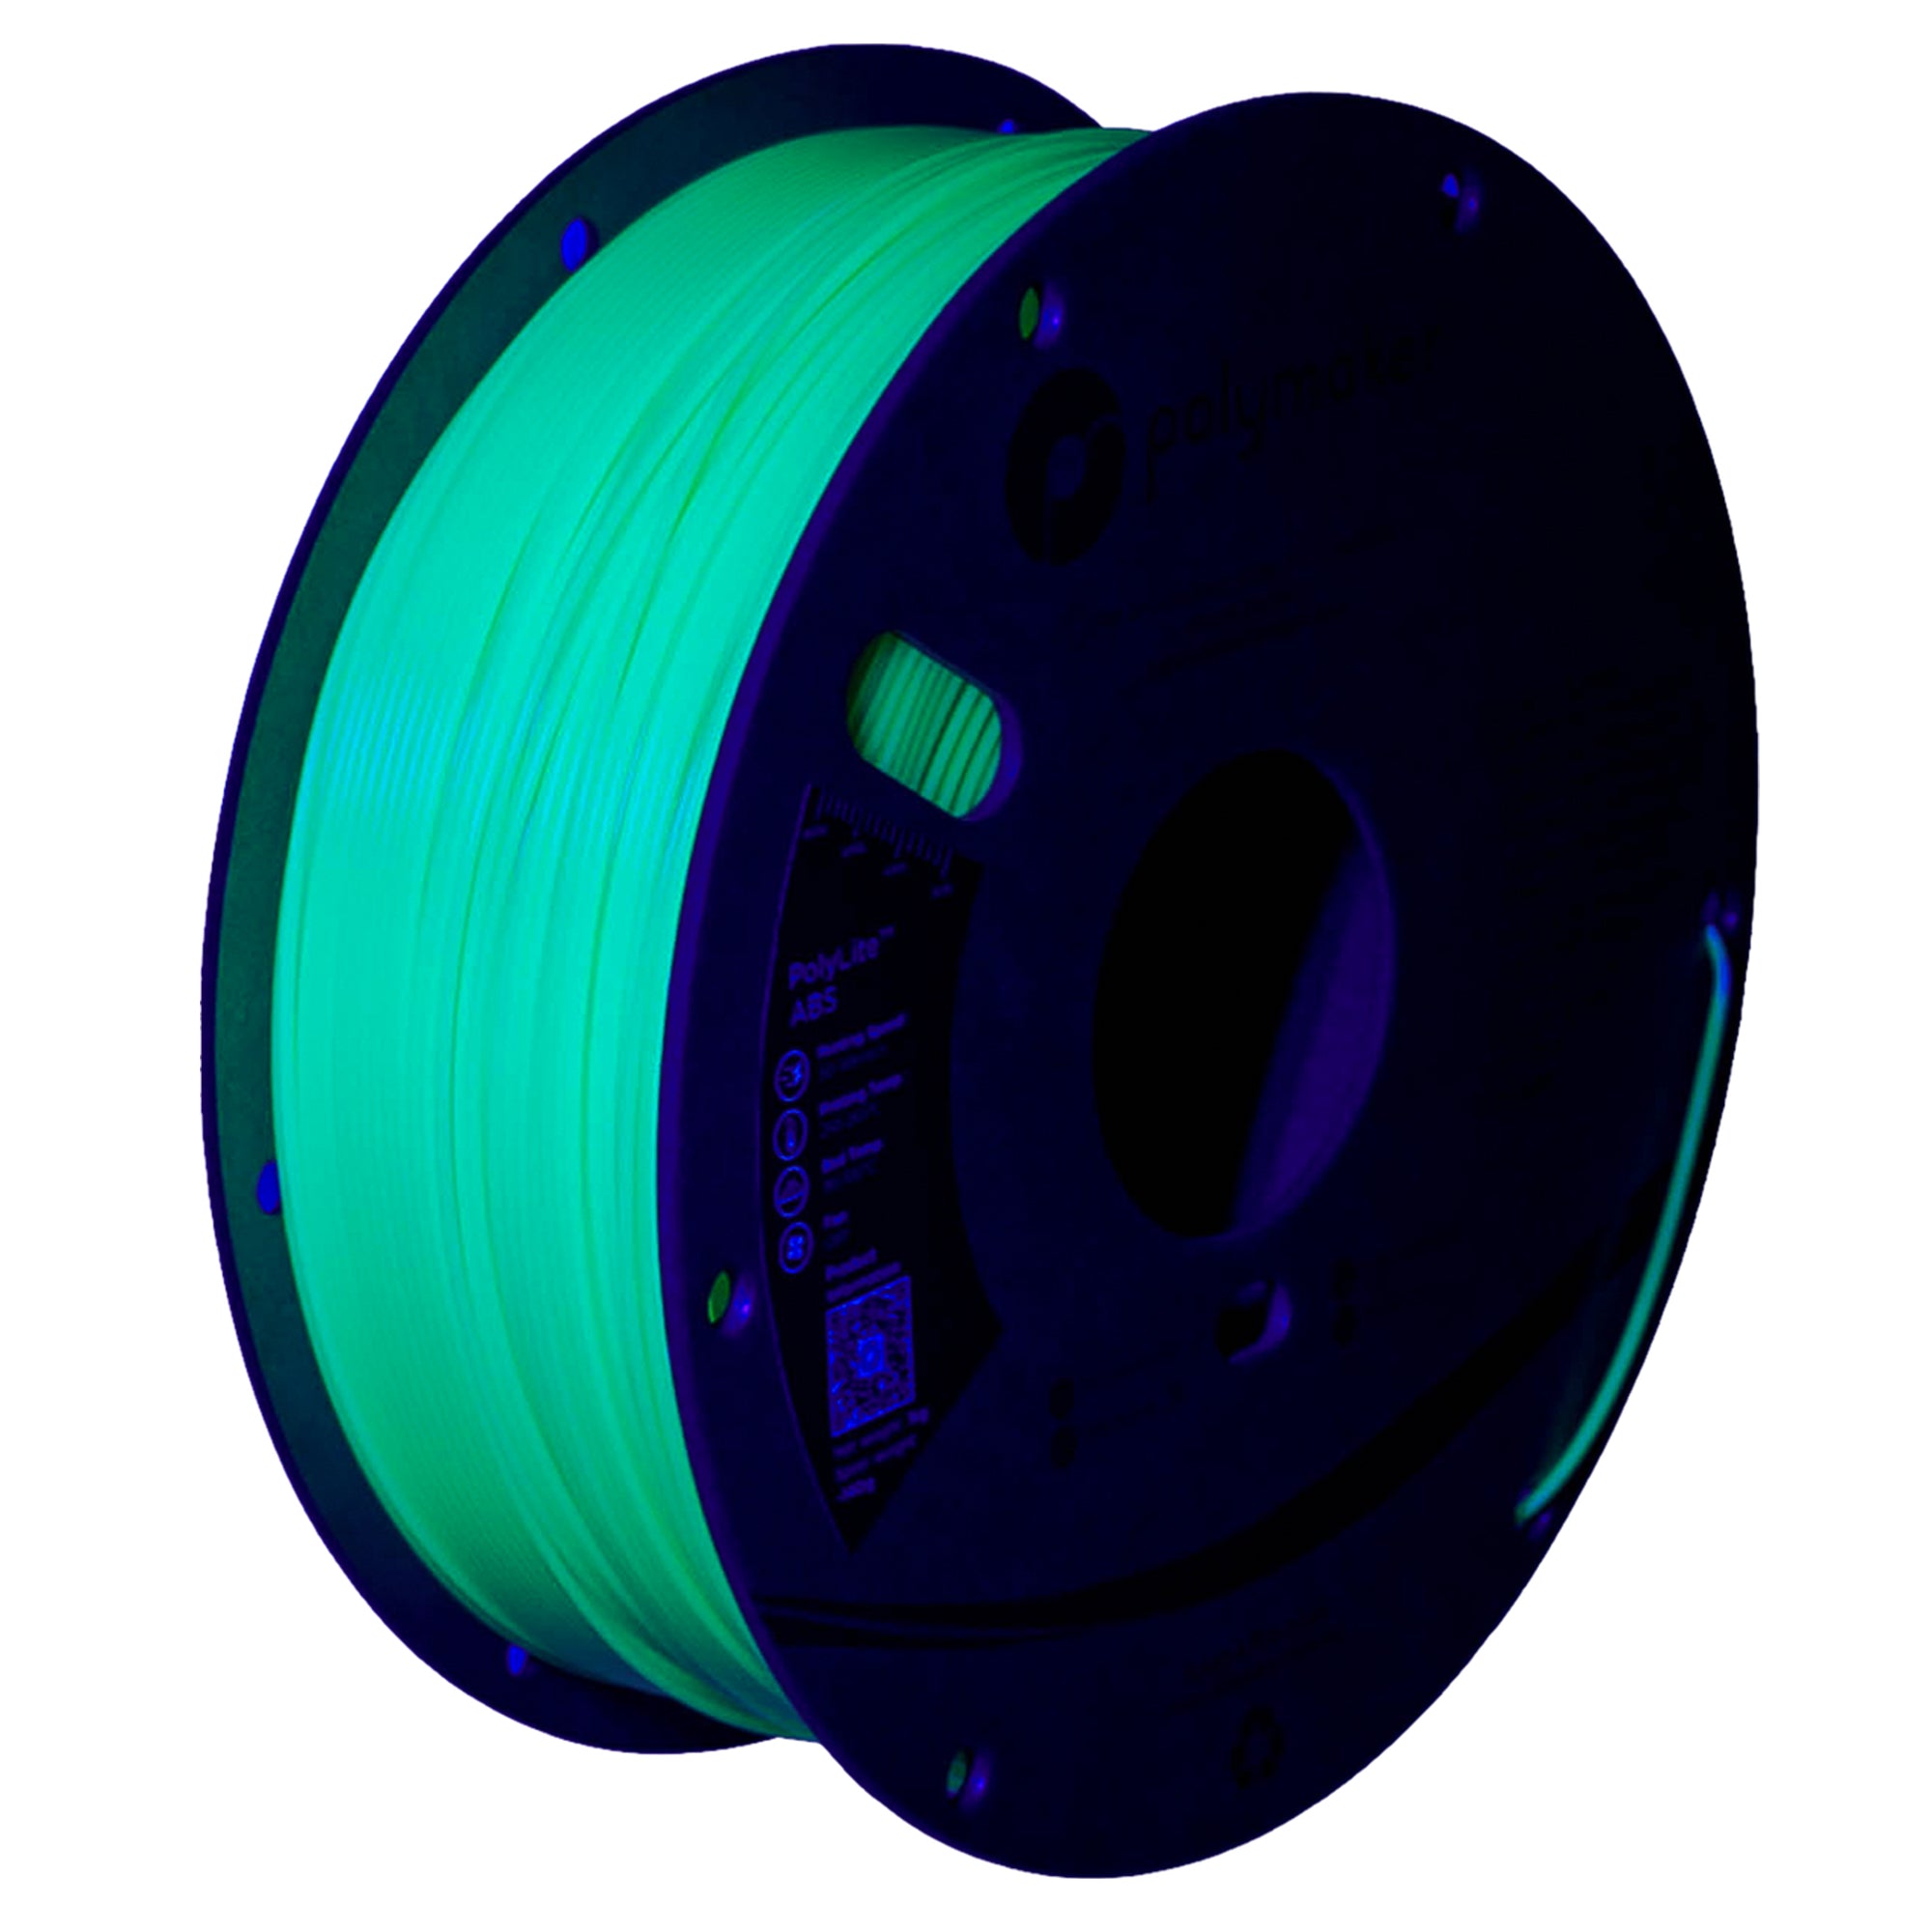 Polymaker PolyLite Neon ABS 1.75mm Filament 1kg